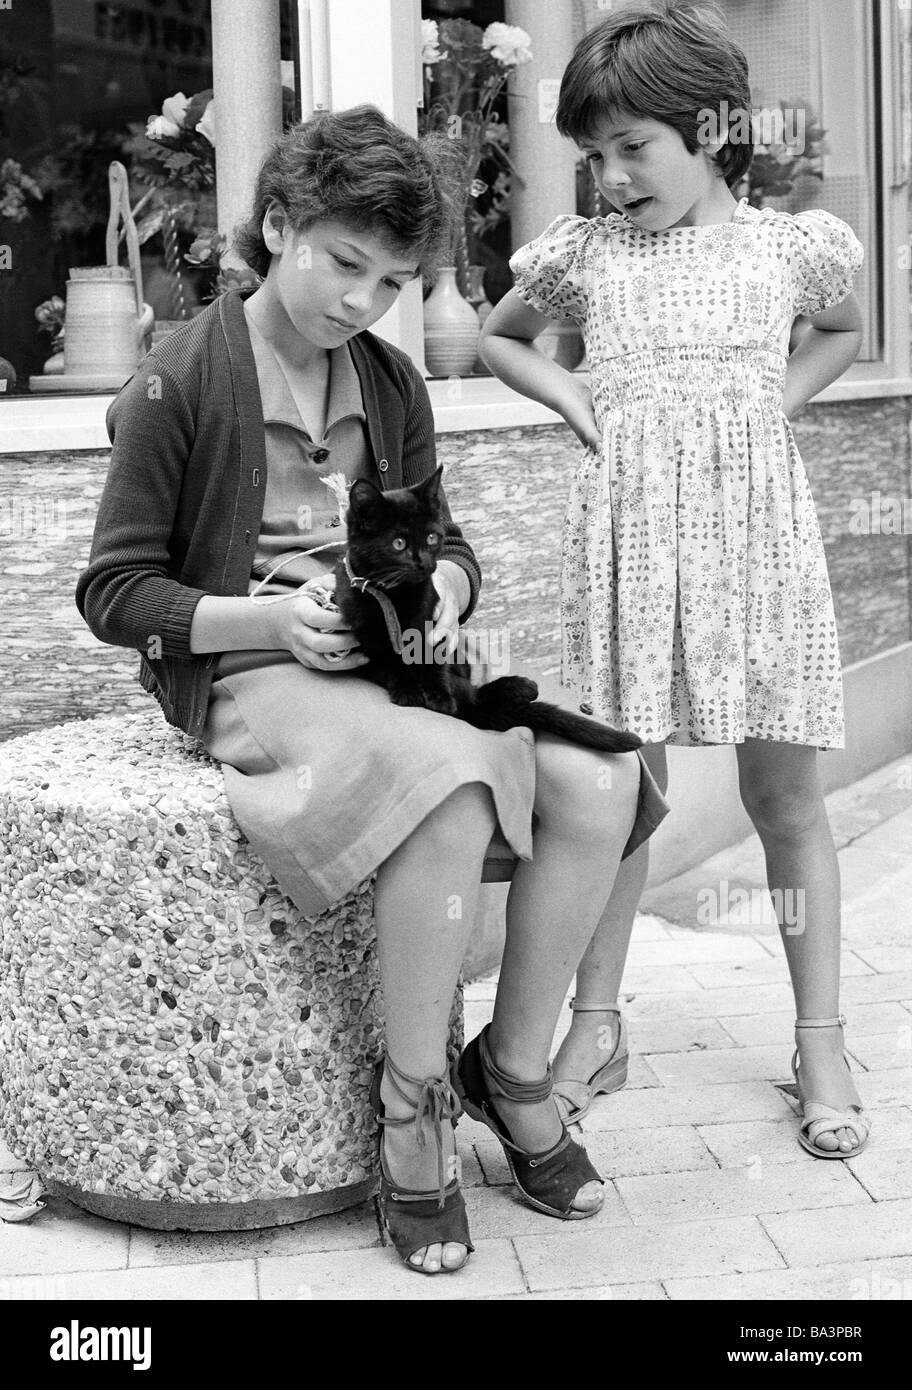 Seventies, black and white photo, people, children, two young girls with a black cat, aged 11 to 13 years, aged 6 to 8 years, France, Loire Valley Stock Photo